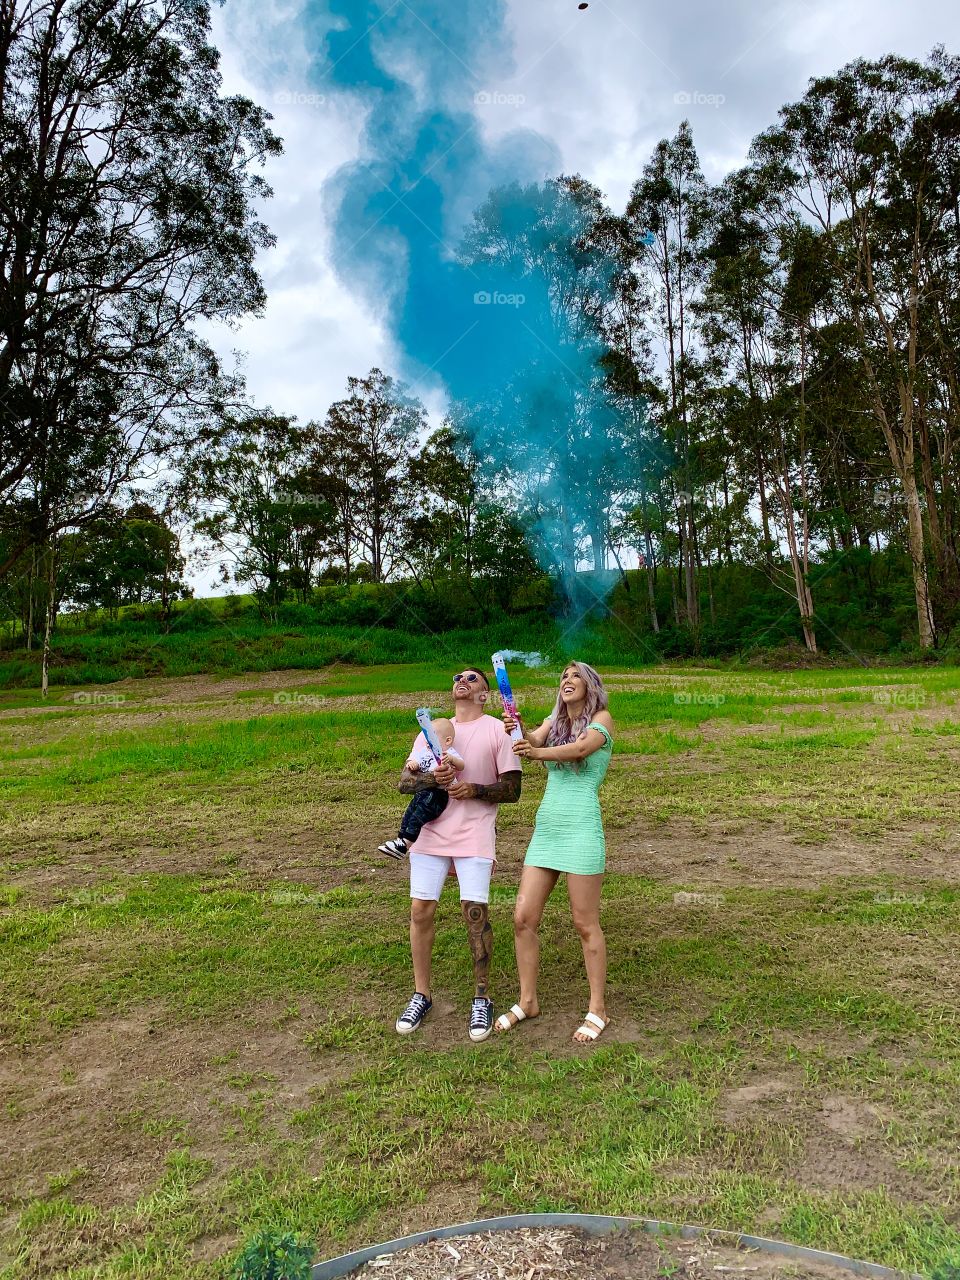 Couple with their first born child, at their 2nd gender reveal finding out that their second baby is going to be a boy! The excitement and surprise looks on their faces are awesome to see! They are going to be a wonderful family. 